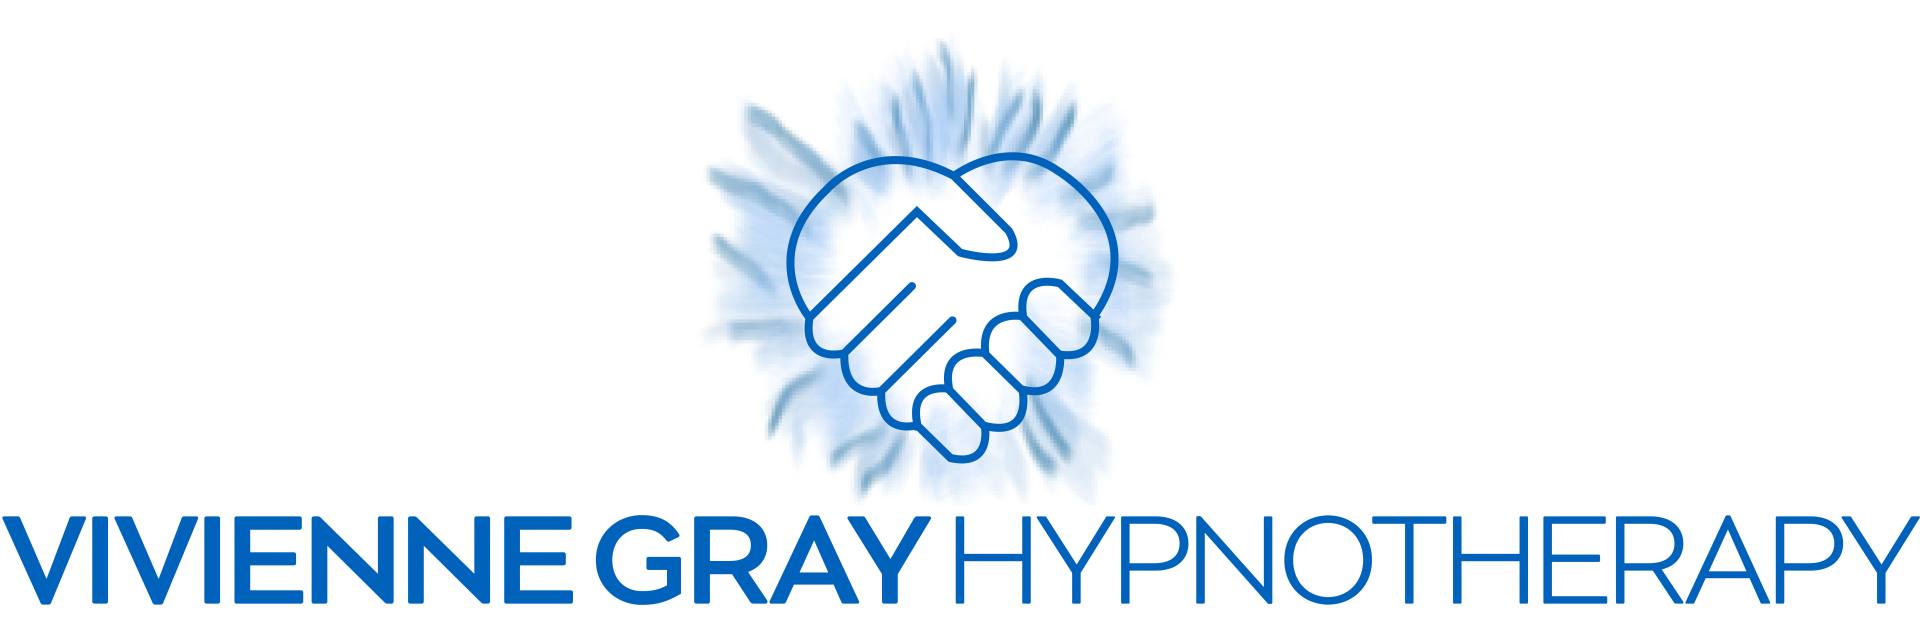 For hypnotherapy treatments, call Vivienne Gray Hypnotherapy